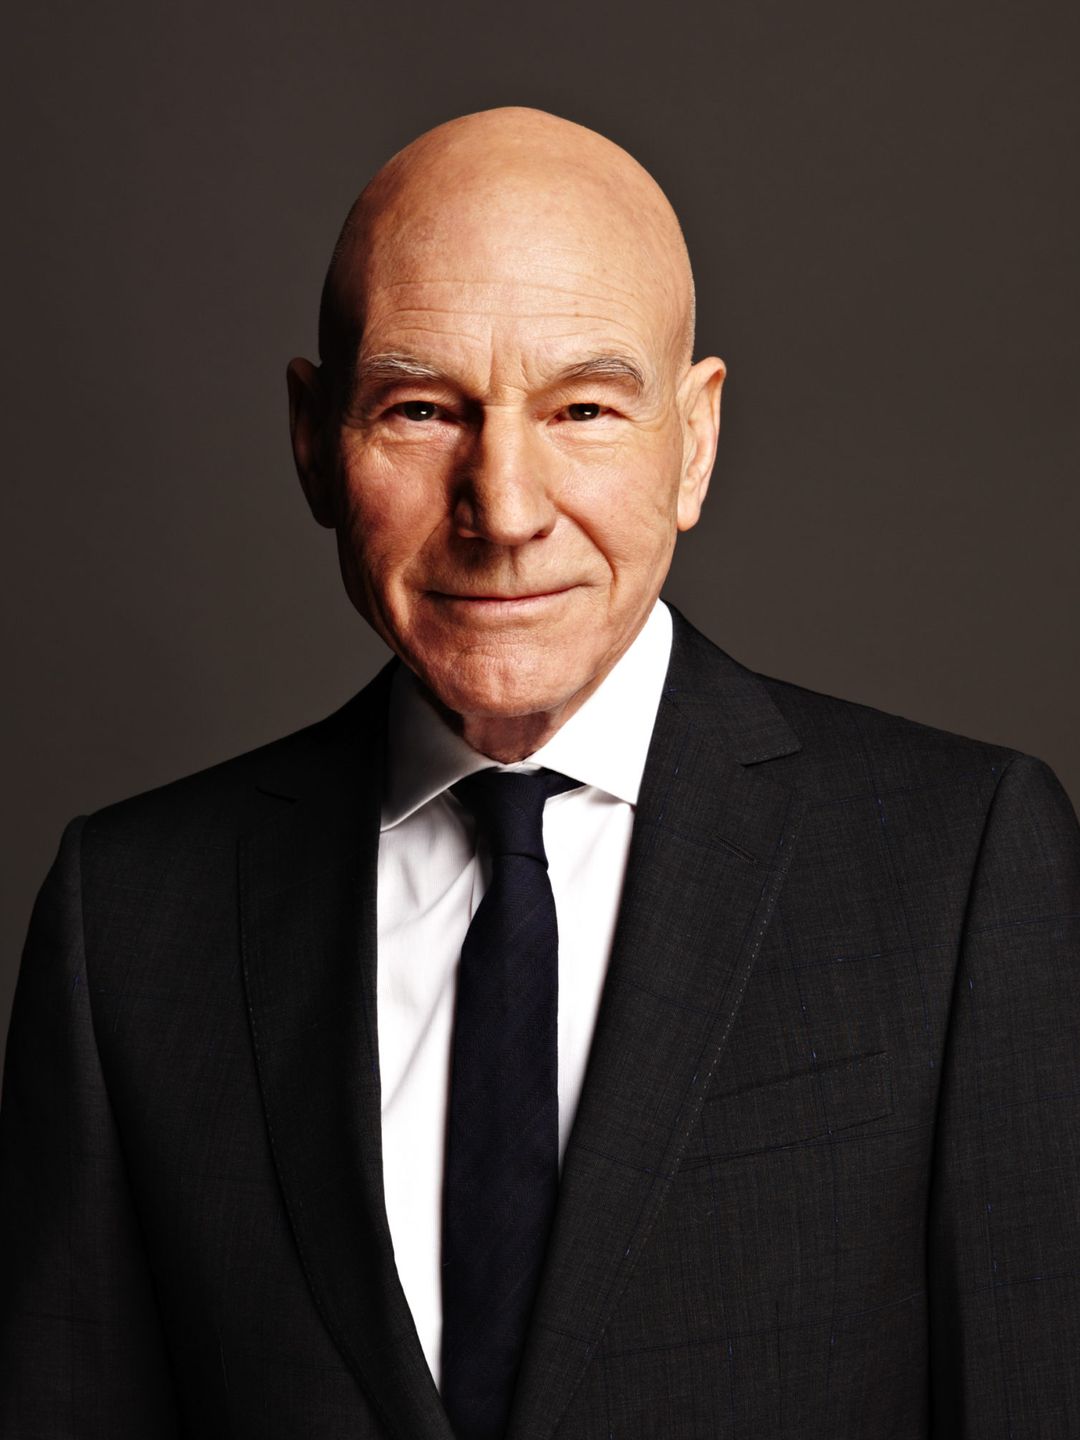 Patrick Stewart how old is he